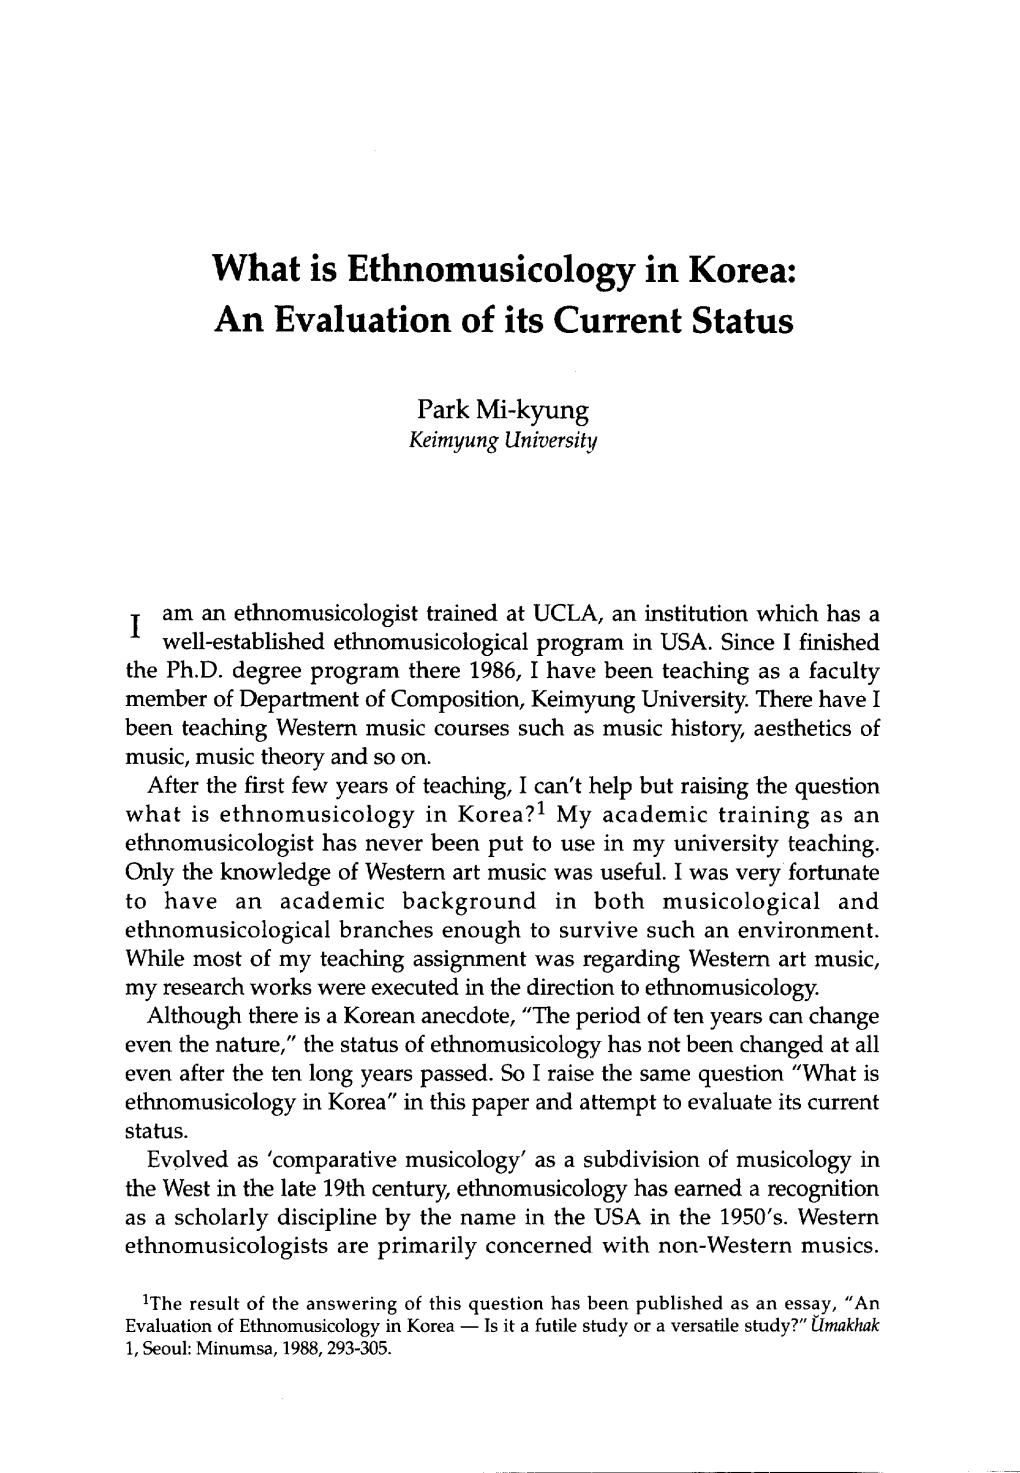 What Is Ethnomusicology in Korea: an Evaluation of Its Current Status